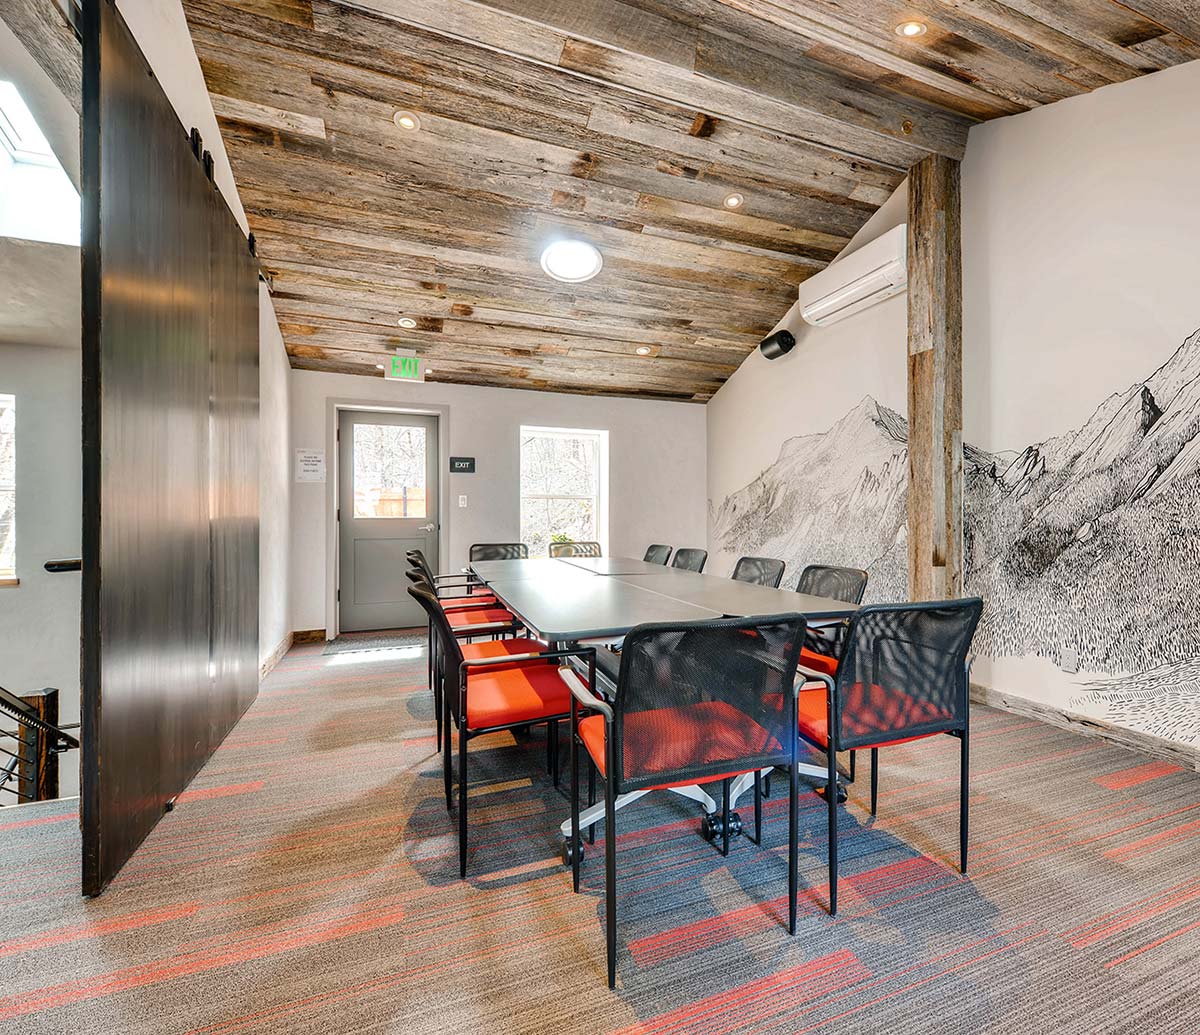 Meeting Room at A-Lodge in Boulder, Colorado